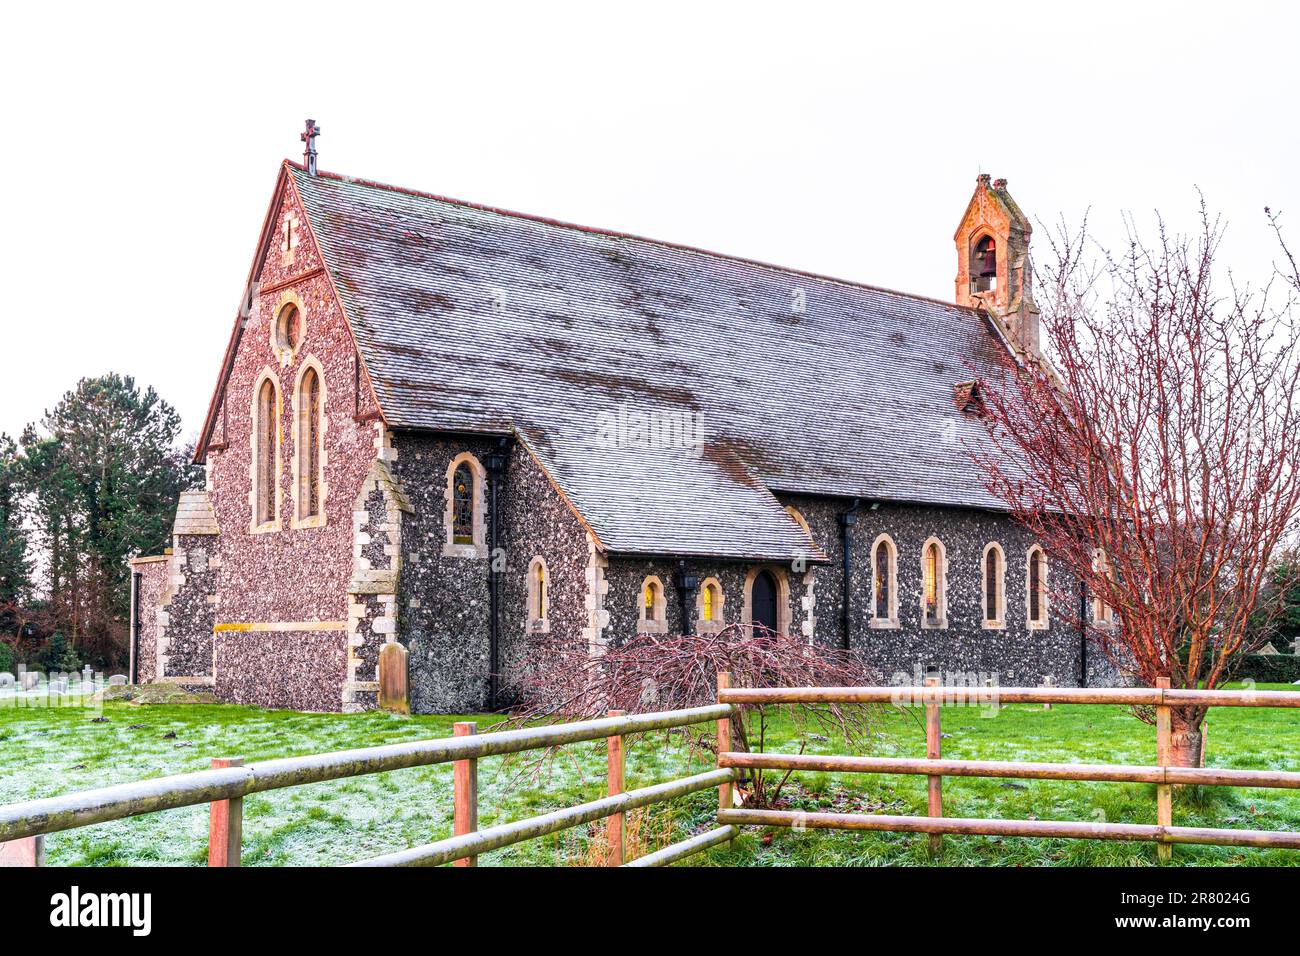 The Church of St Mary at Reculver built circa 1876 in the Gothic Revival style with an exterior of knapped flint. on a cold frosty winter morning. Stock Photo